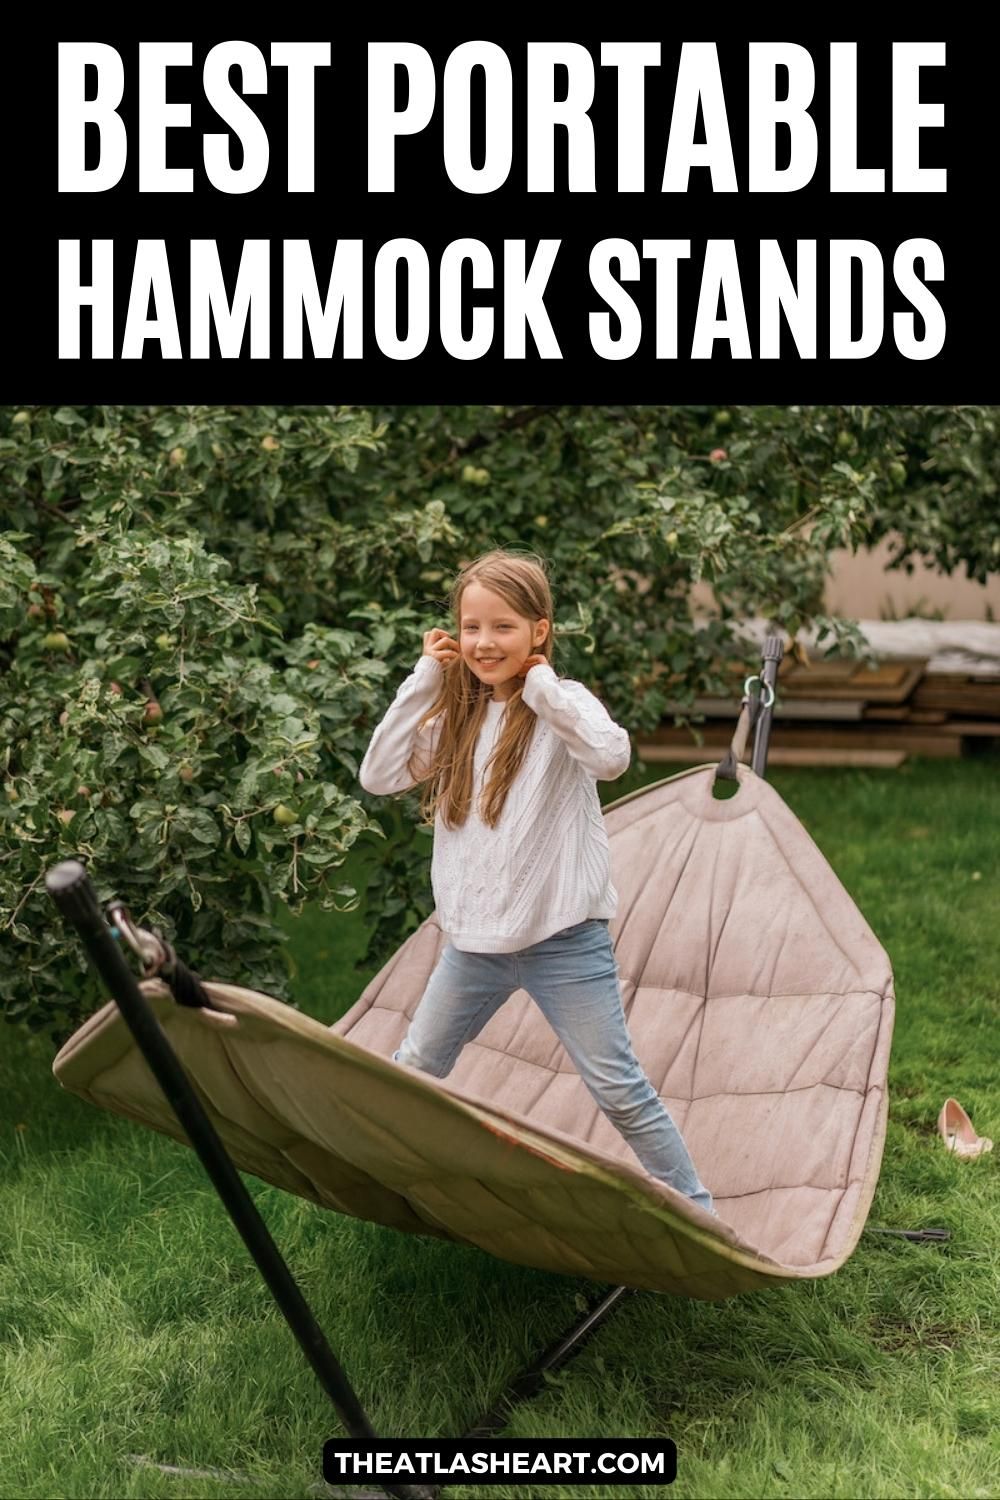 A young blonde girl wearing jeans and a white sweater stands on a grey hammock supported by a stand next to an apple tree in a backyard setting, with the text overlay, "Best Portable Hammock Stands."